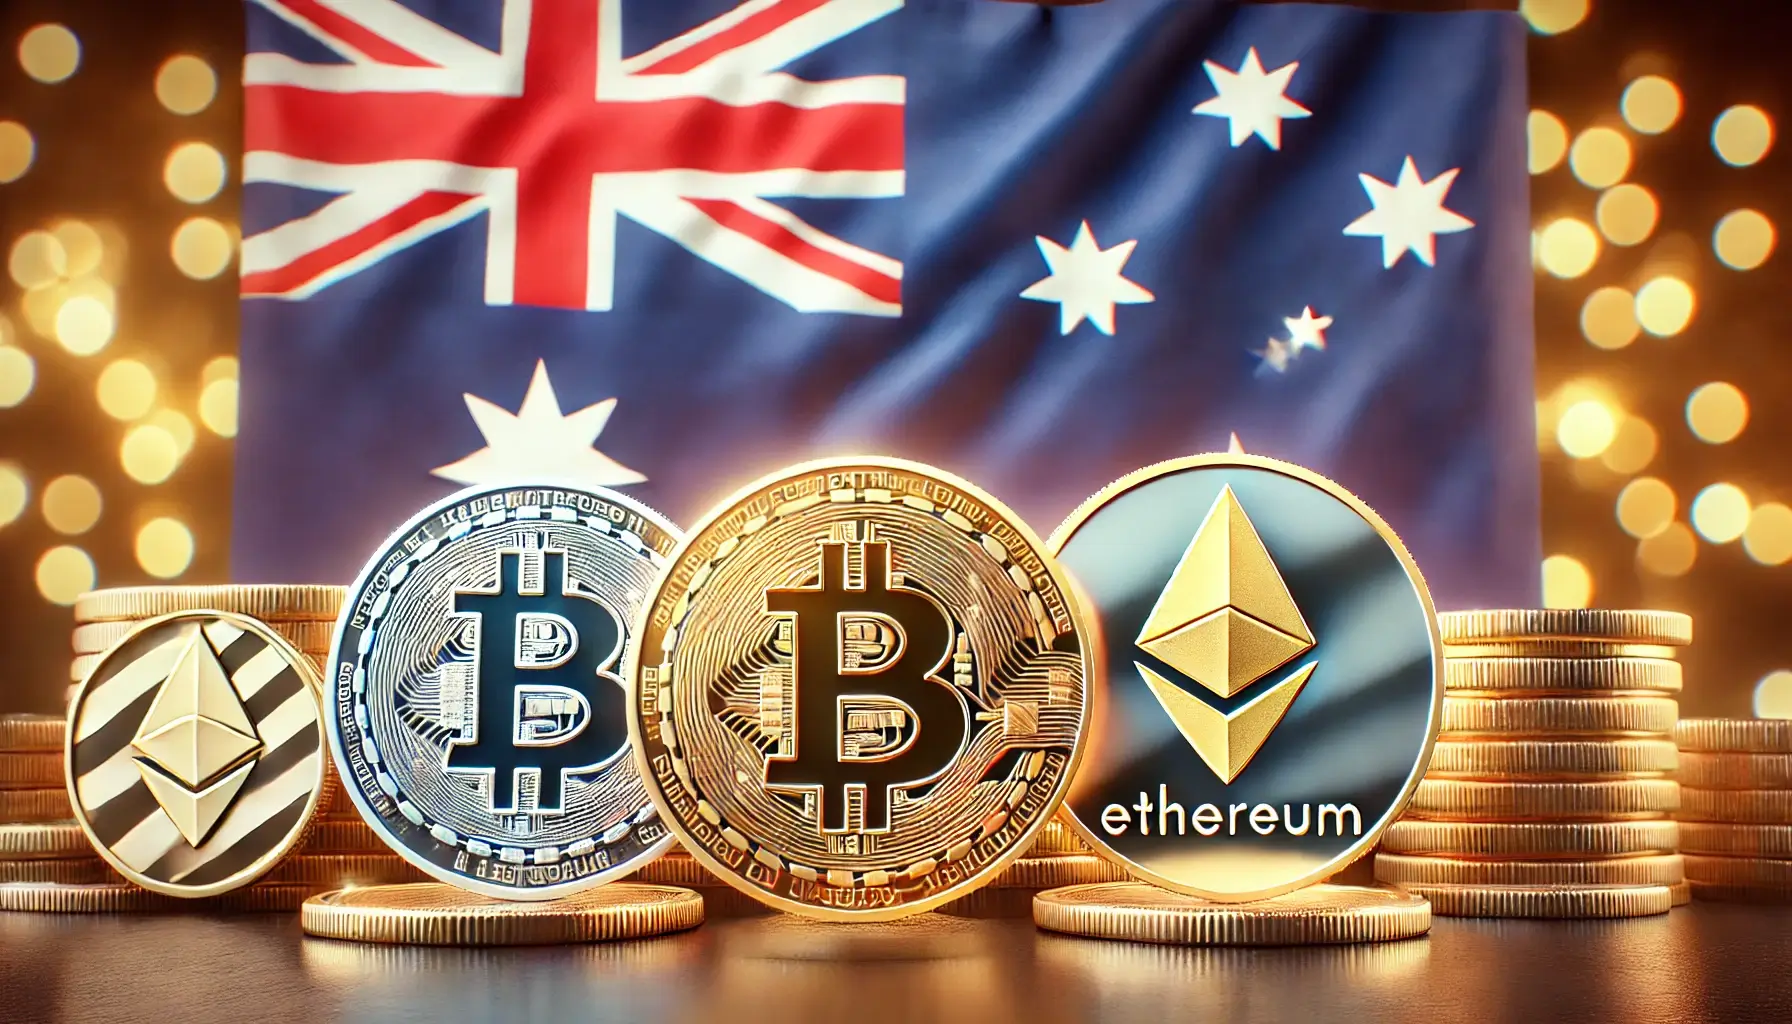 Australia's crypto casino ban came into effect last month - but there’s rapid growth in these top 10 countries